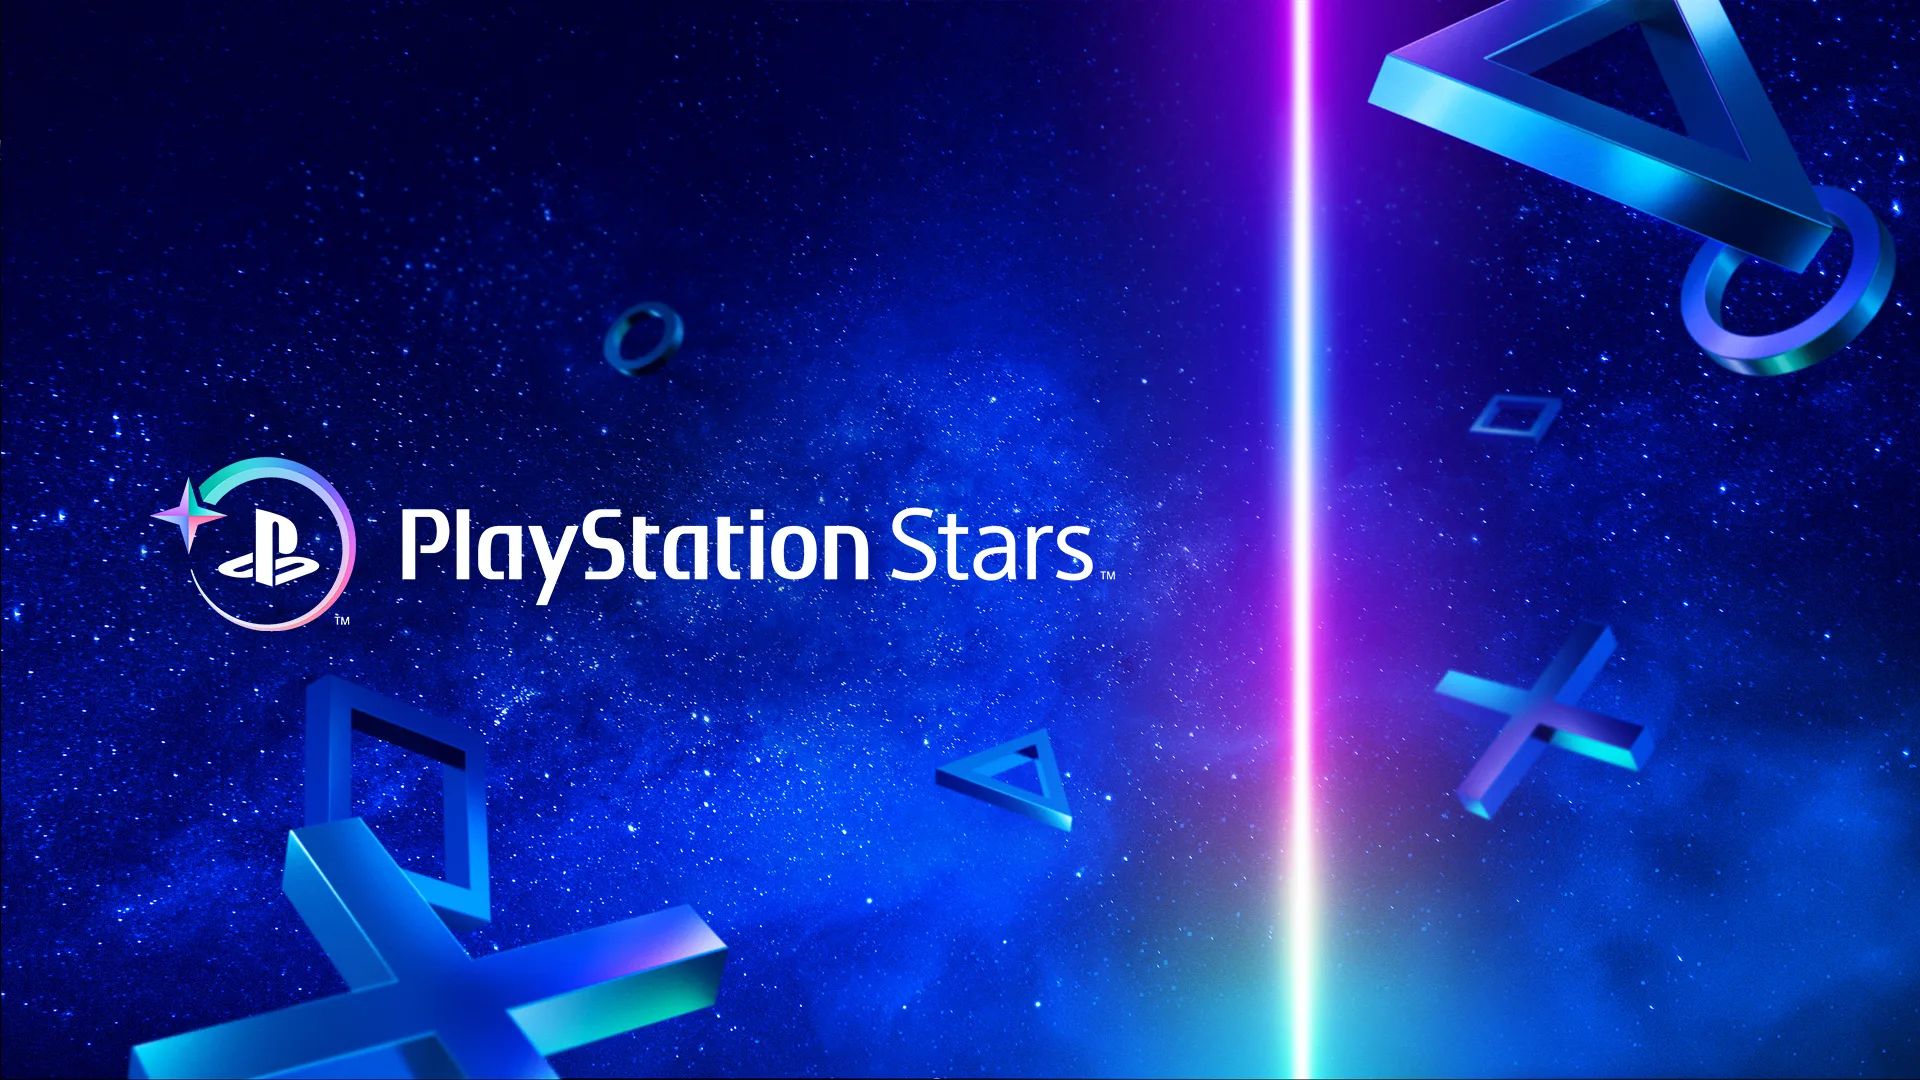 Playstation Stars: a Look Into Sony’s Exclusive Titles